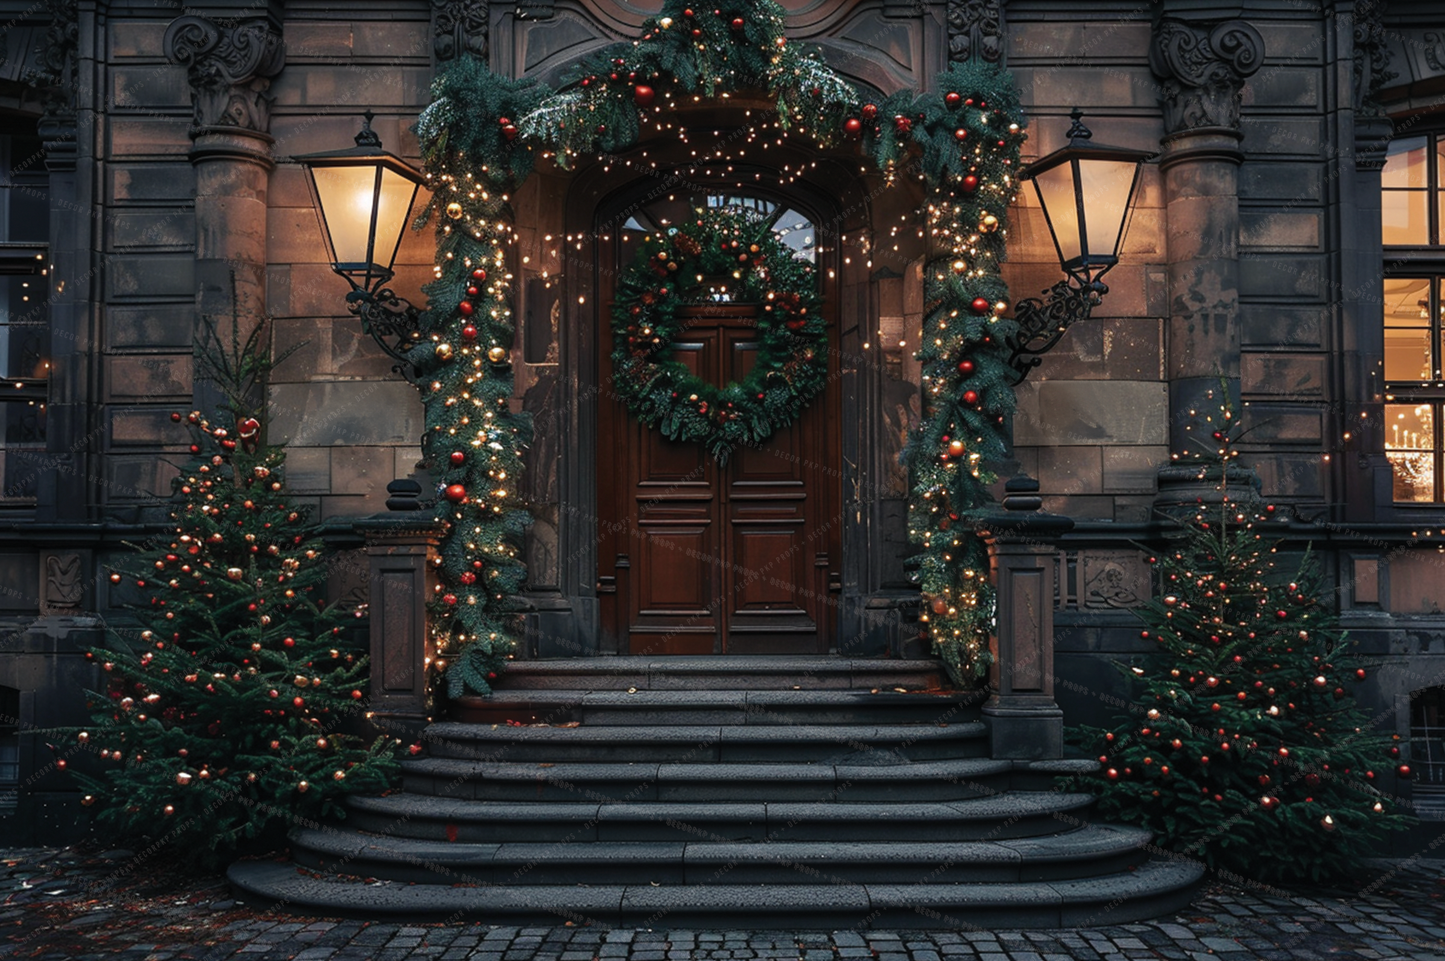 Town Hall Steps at Christmas with Red - VH